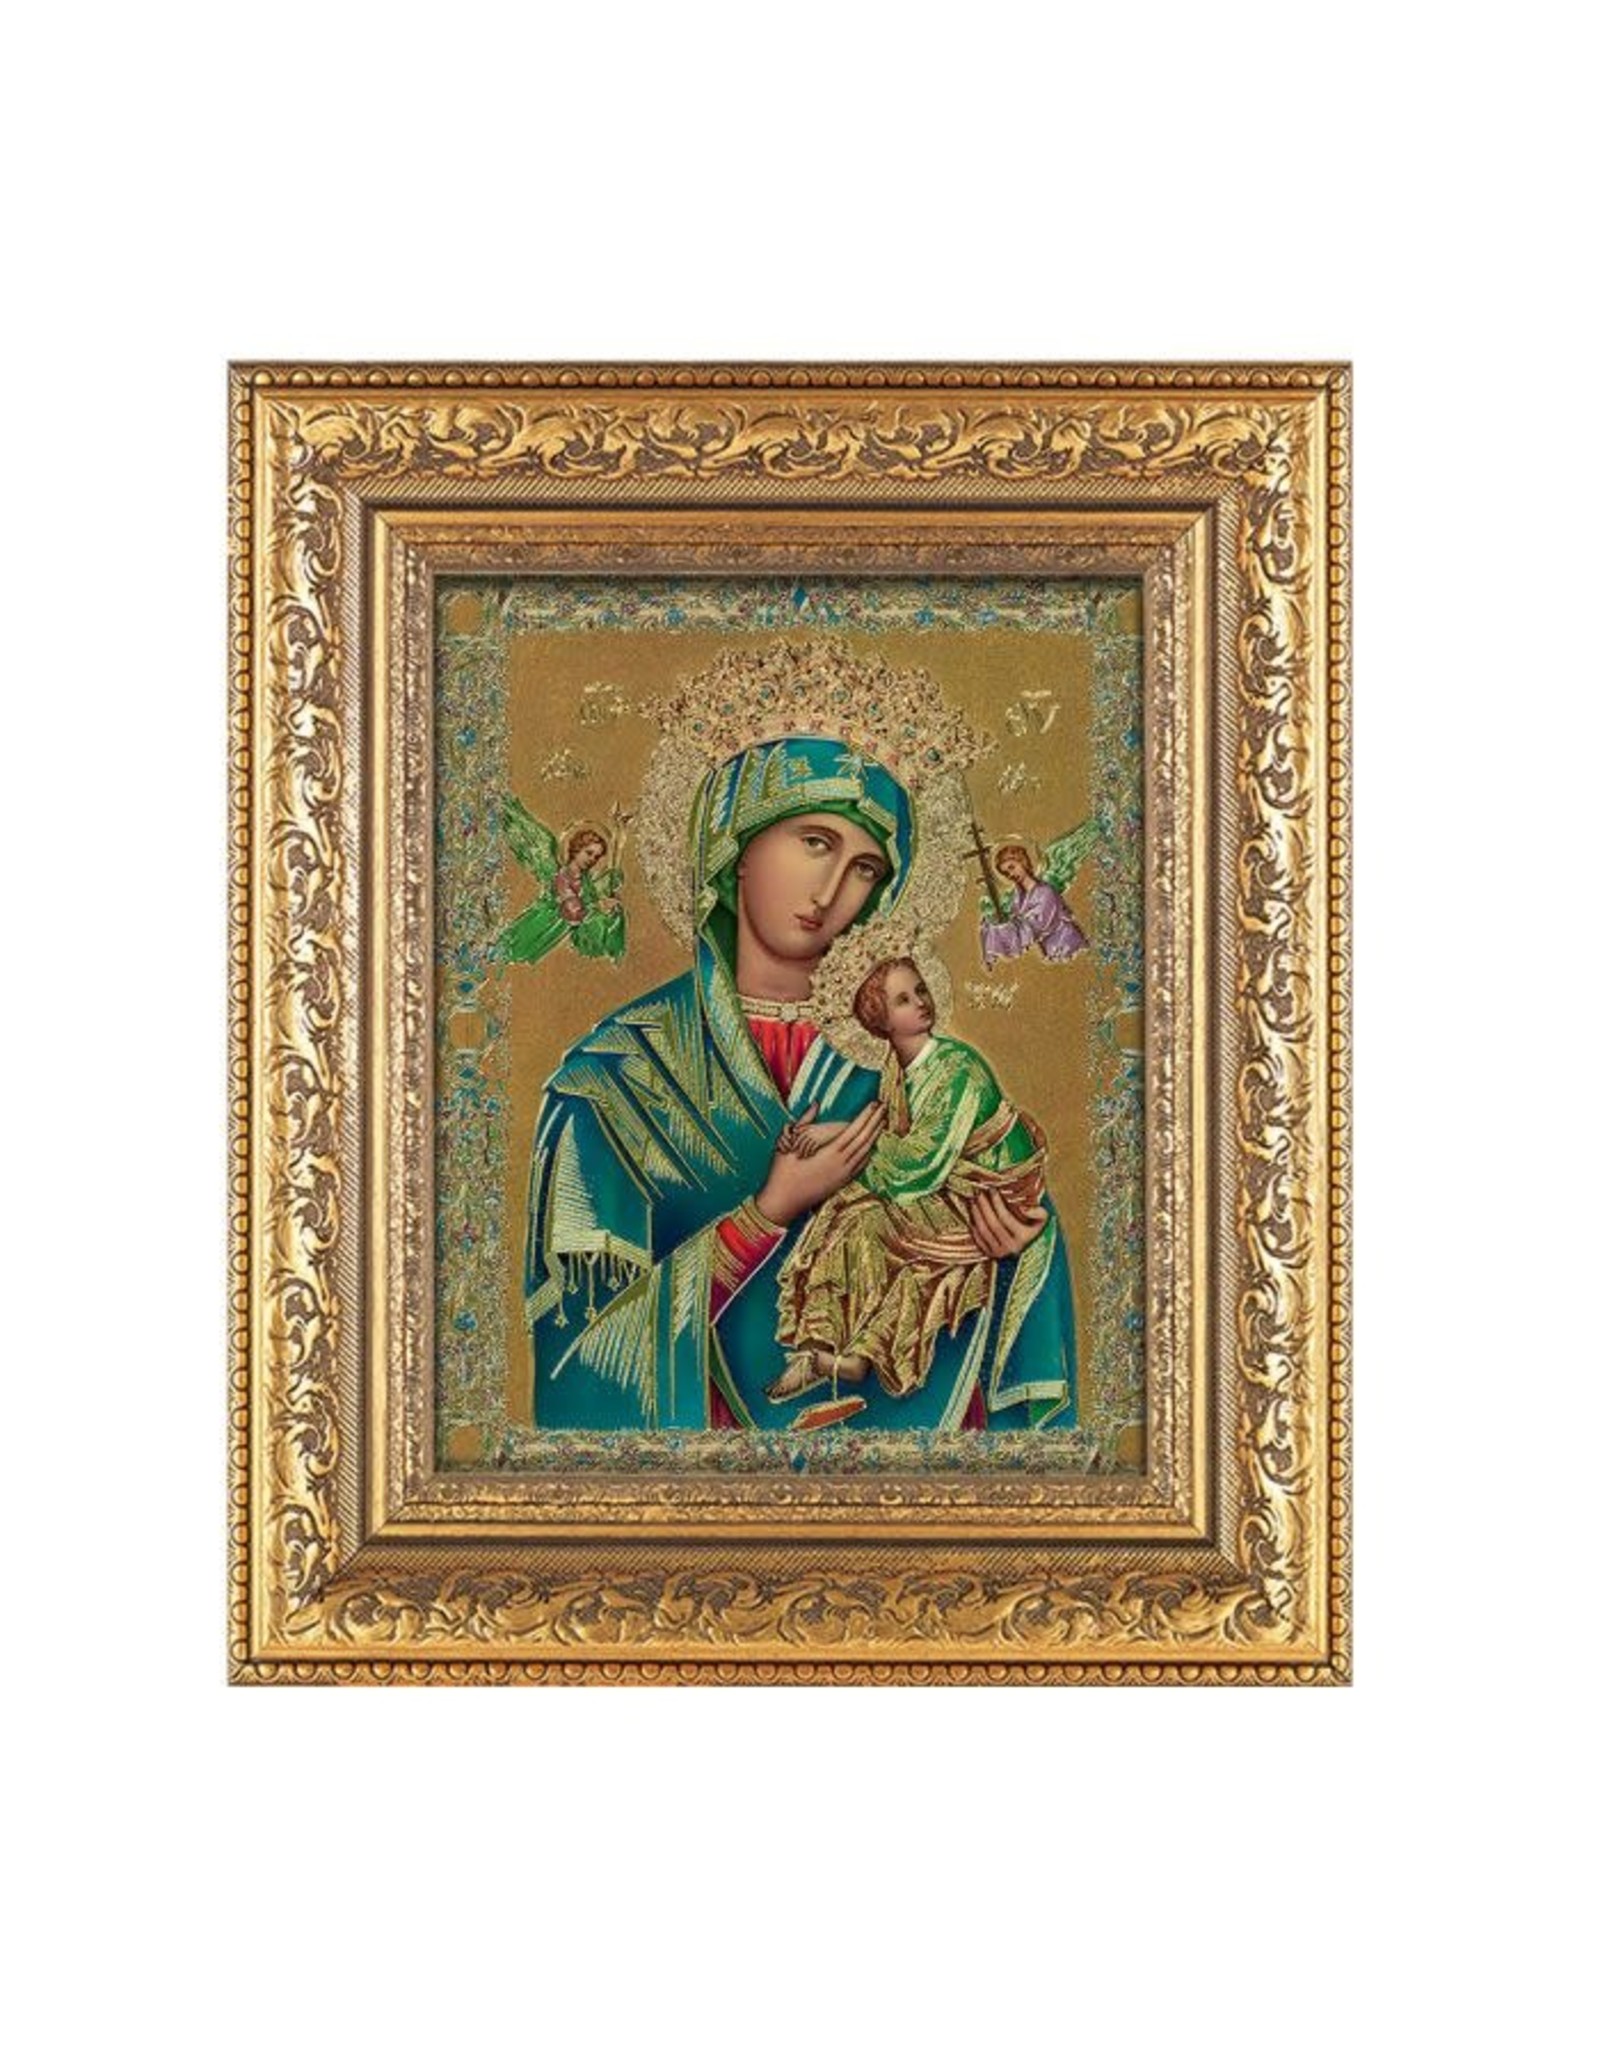 Hirten Picture - Our Lady of Perpetual Help, 12-1/2"x14-1/2"